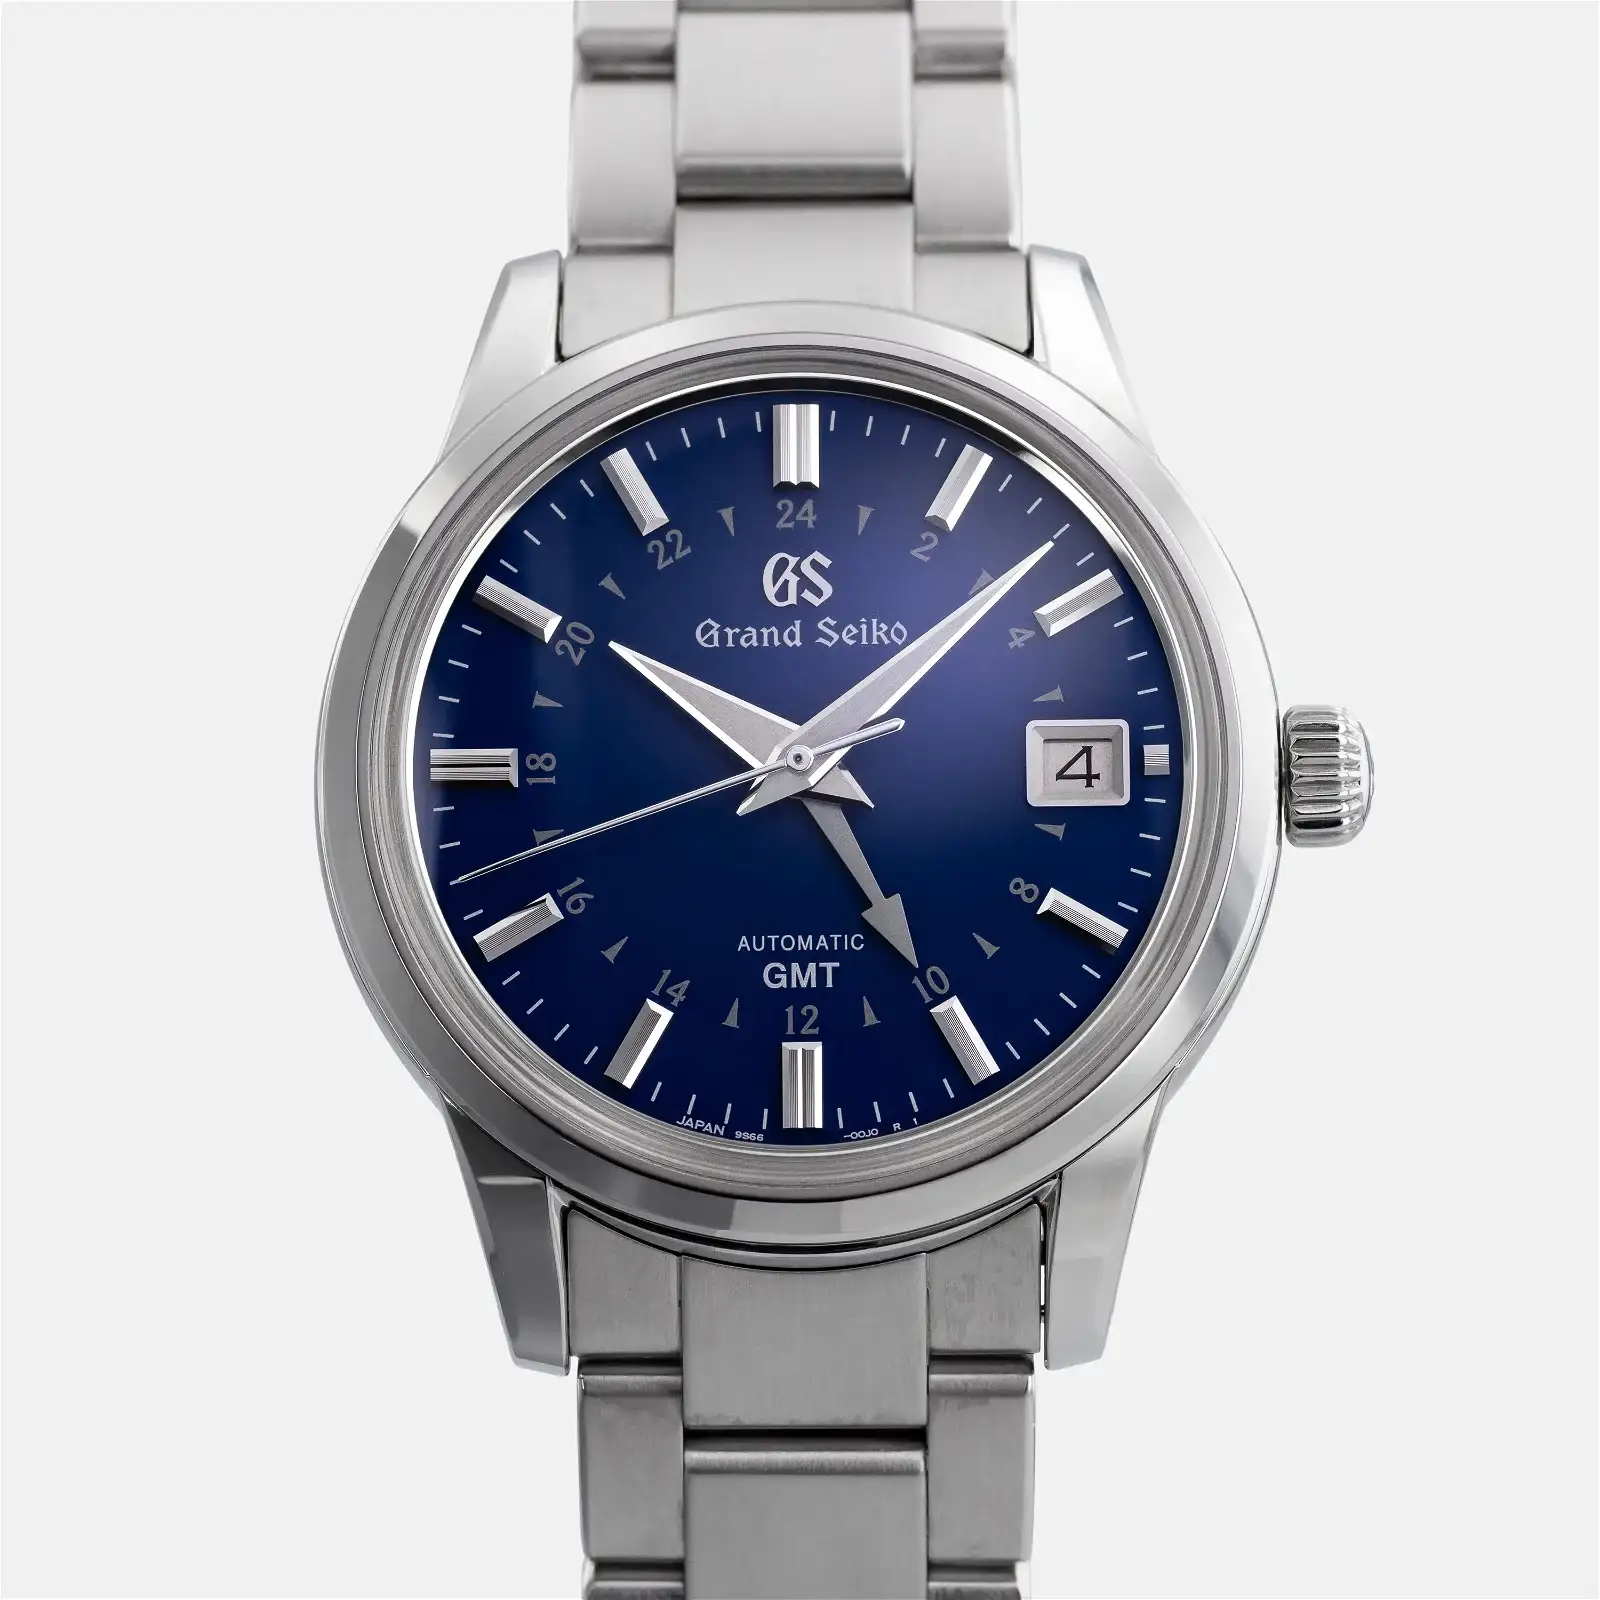 Image of Grand Seiko Elegance GMT Automatic HODINKEE Limited Edition SBGM239